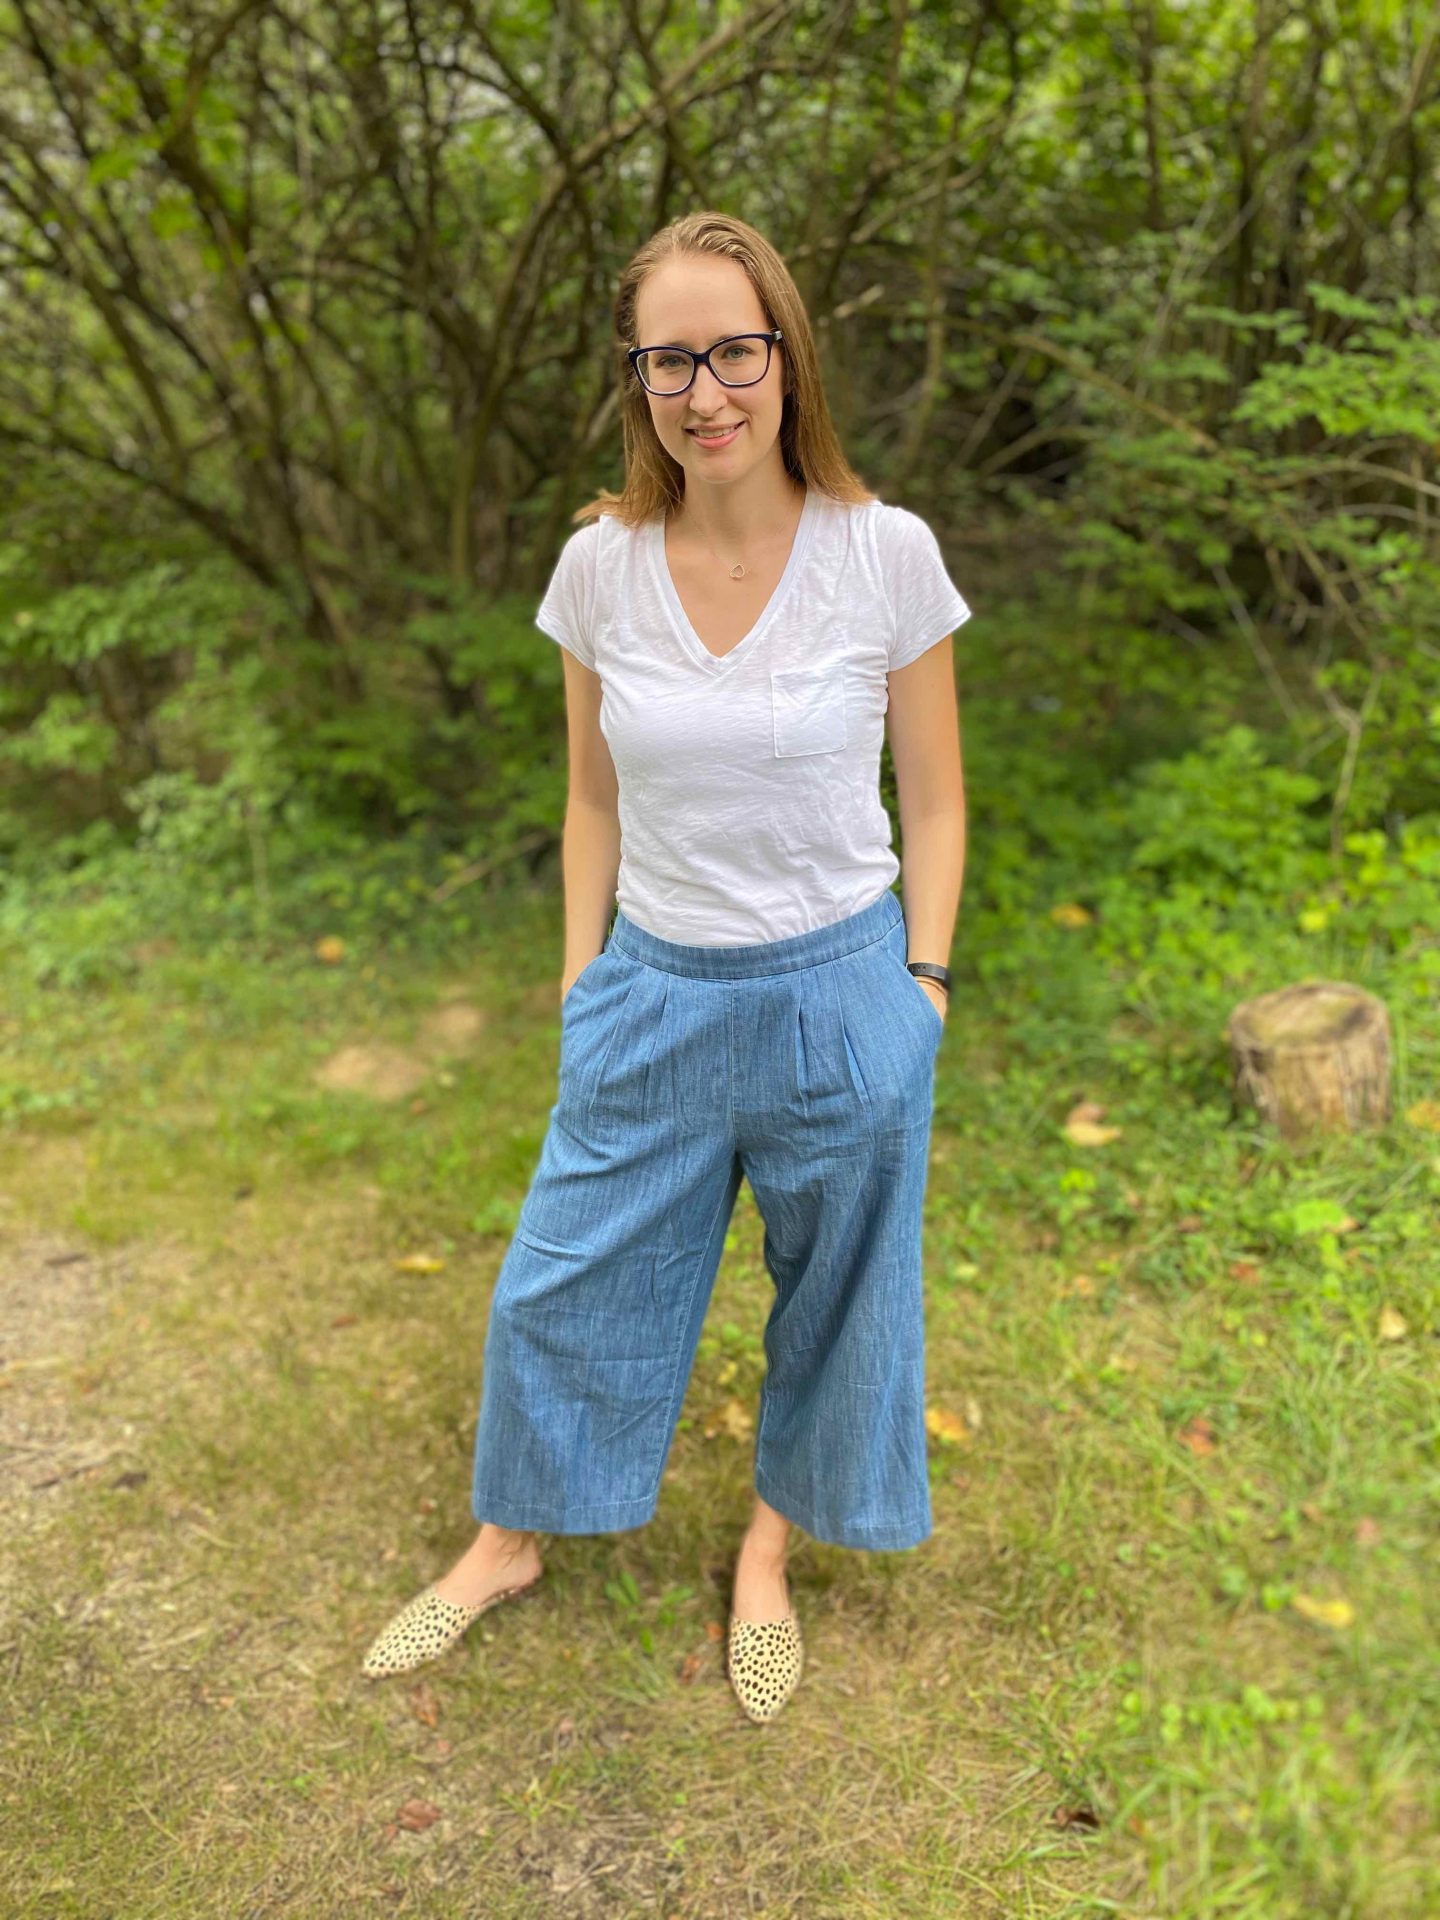 Wide Leg Pant Casual Outfit Idea | The Spectacular Adventurer